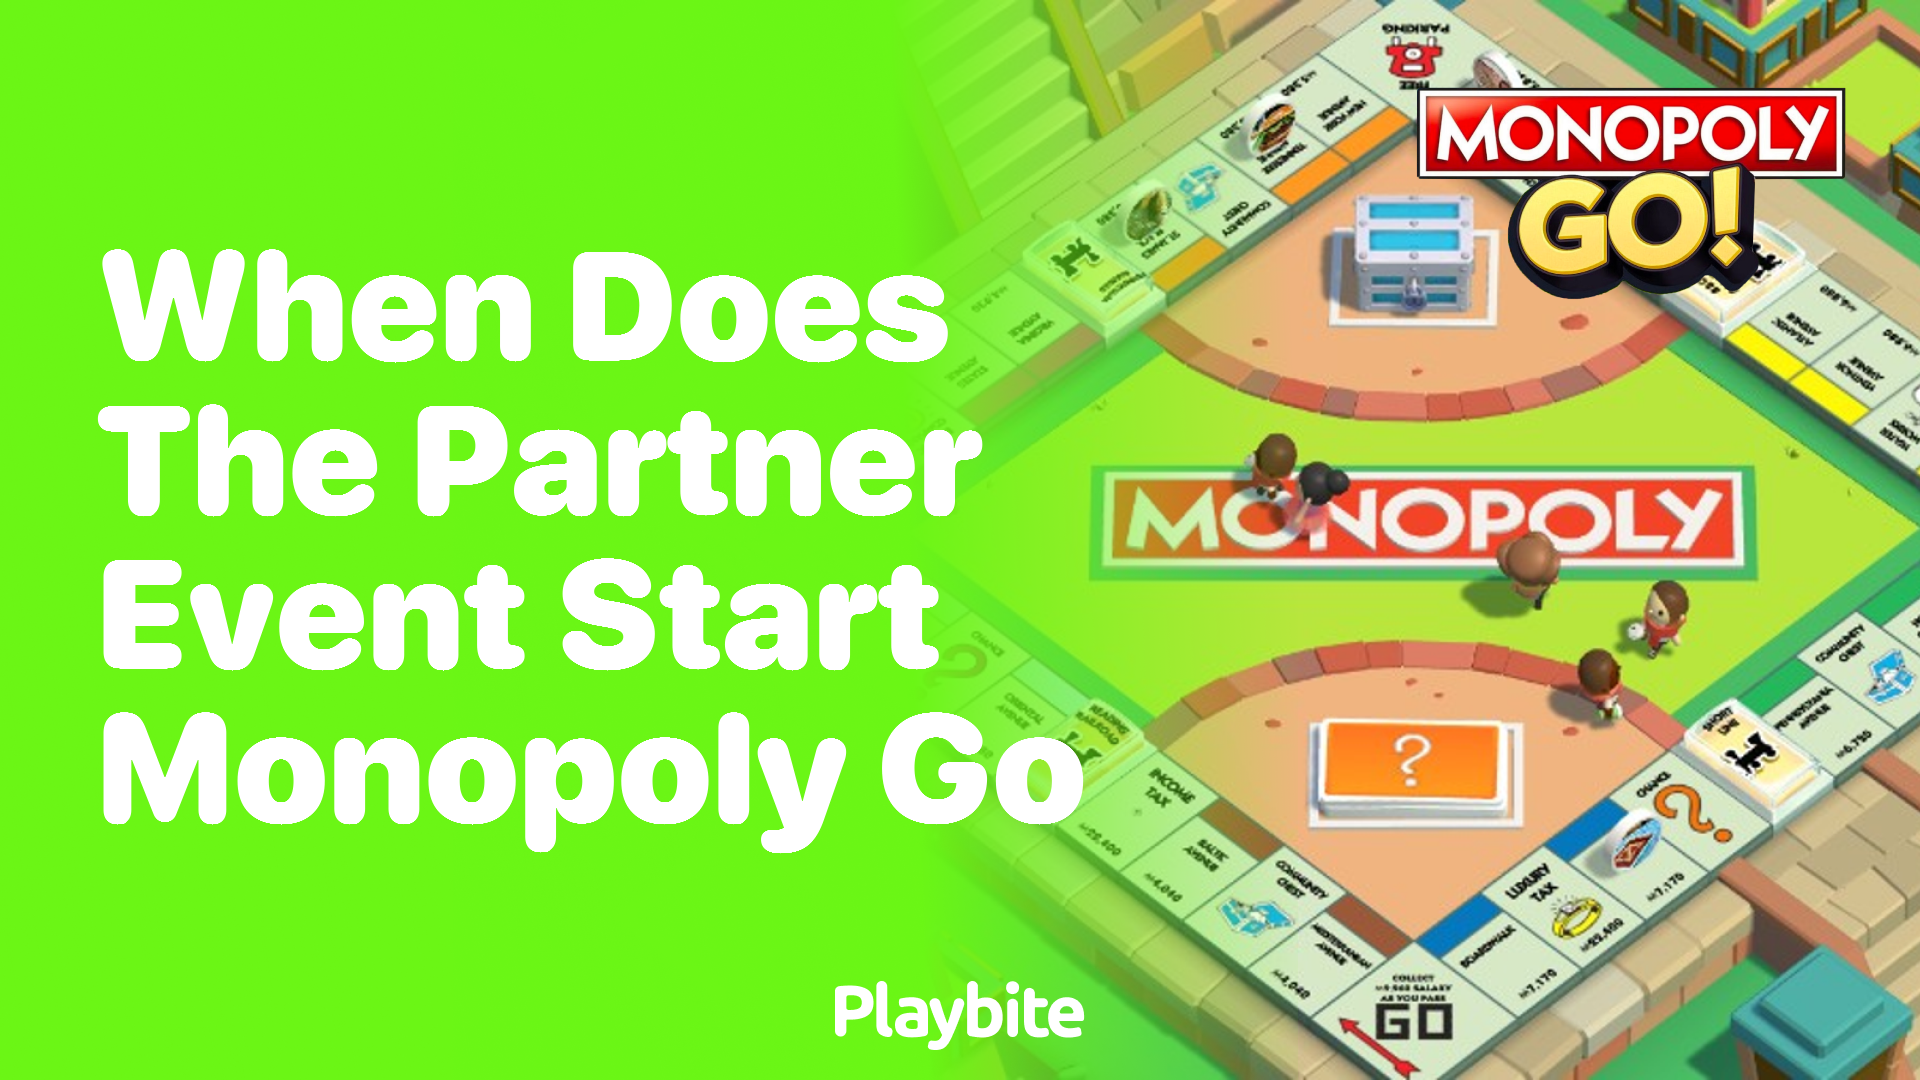 When Does the Partner Event Start in Monopoly Go?